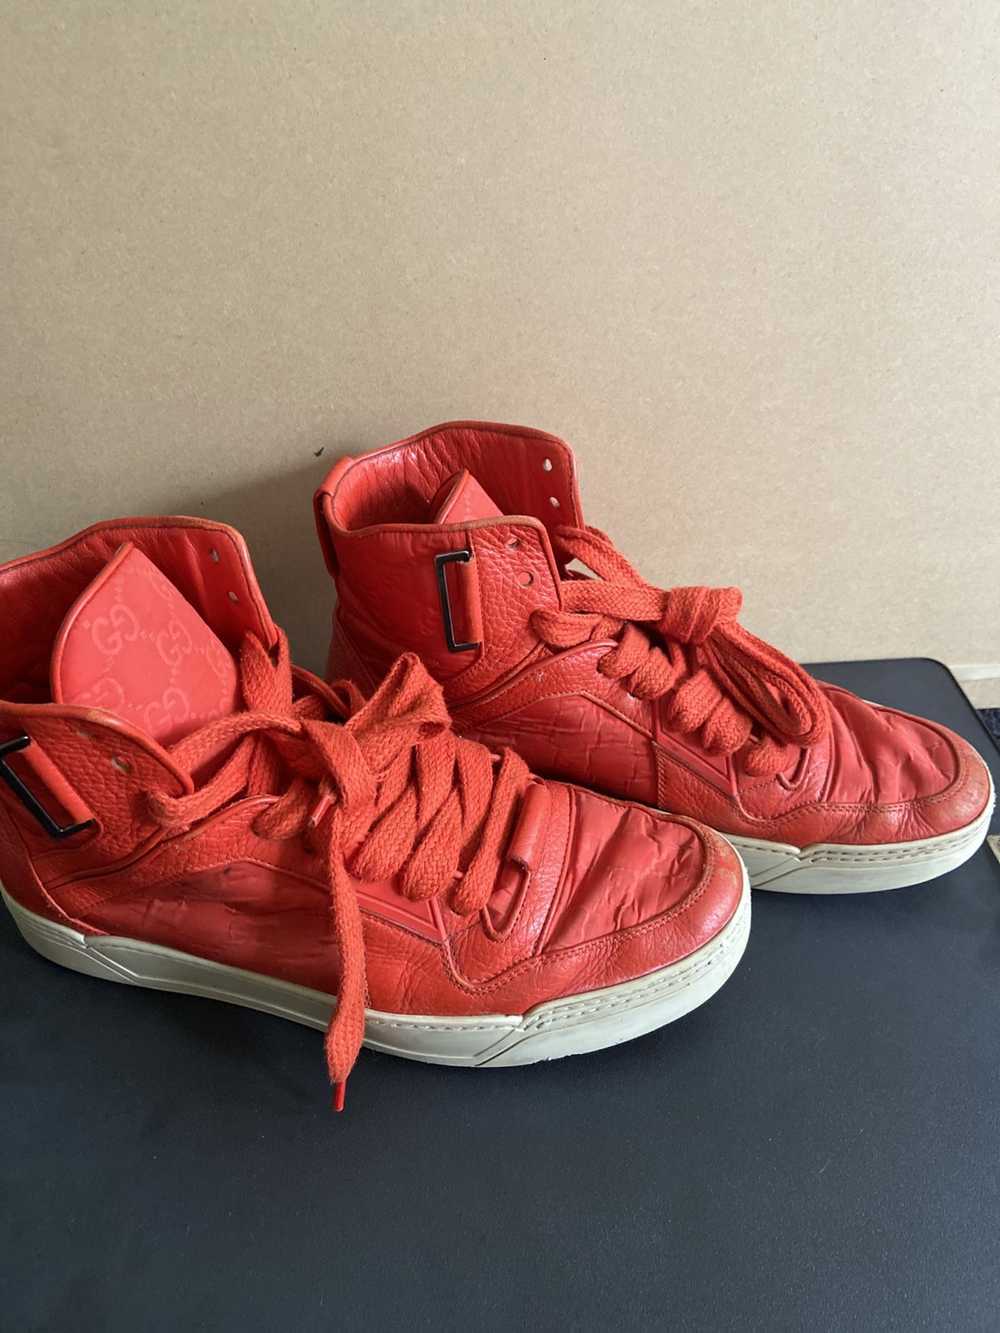 Gucci Guccimissa High Top Orange-Red Sneakers - image 3